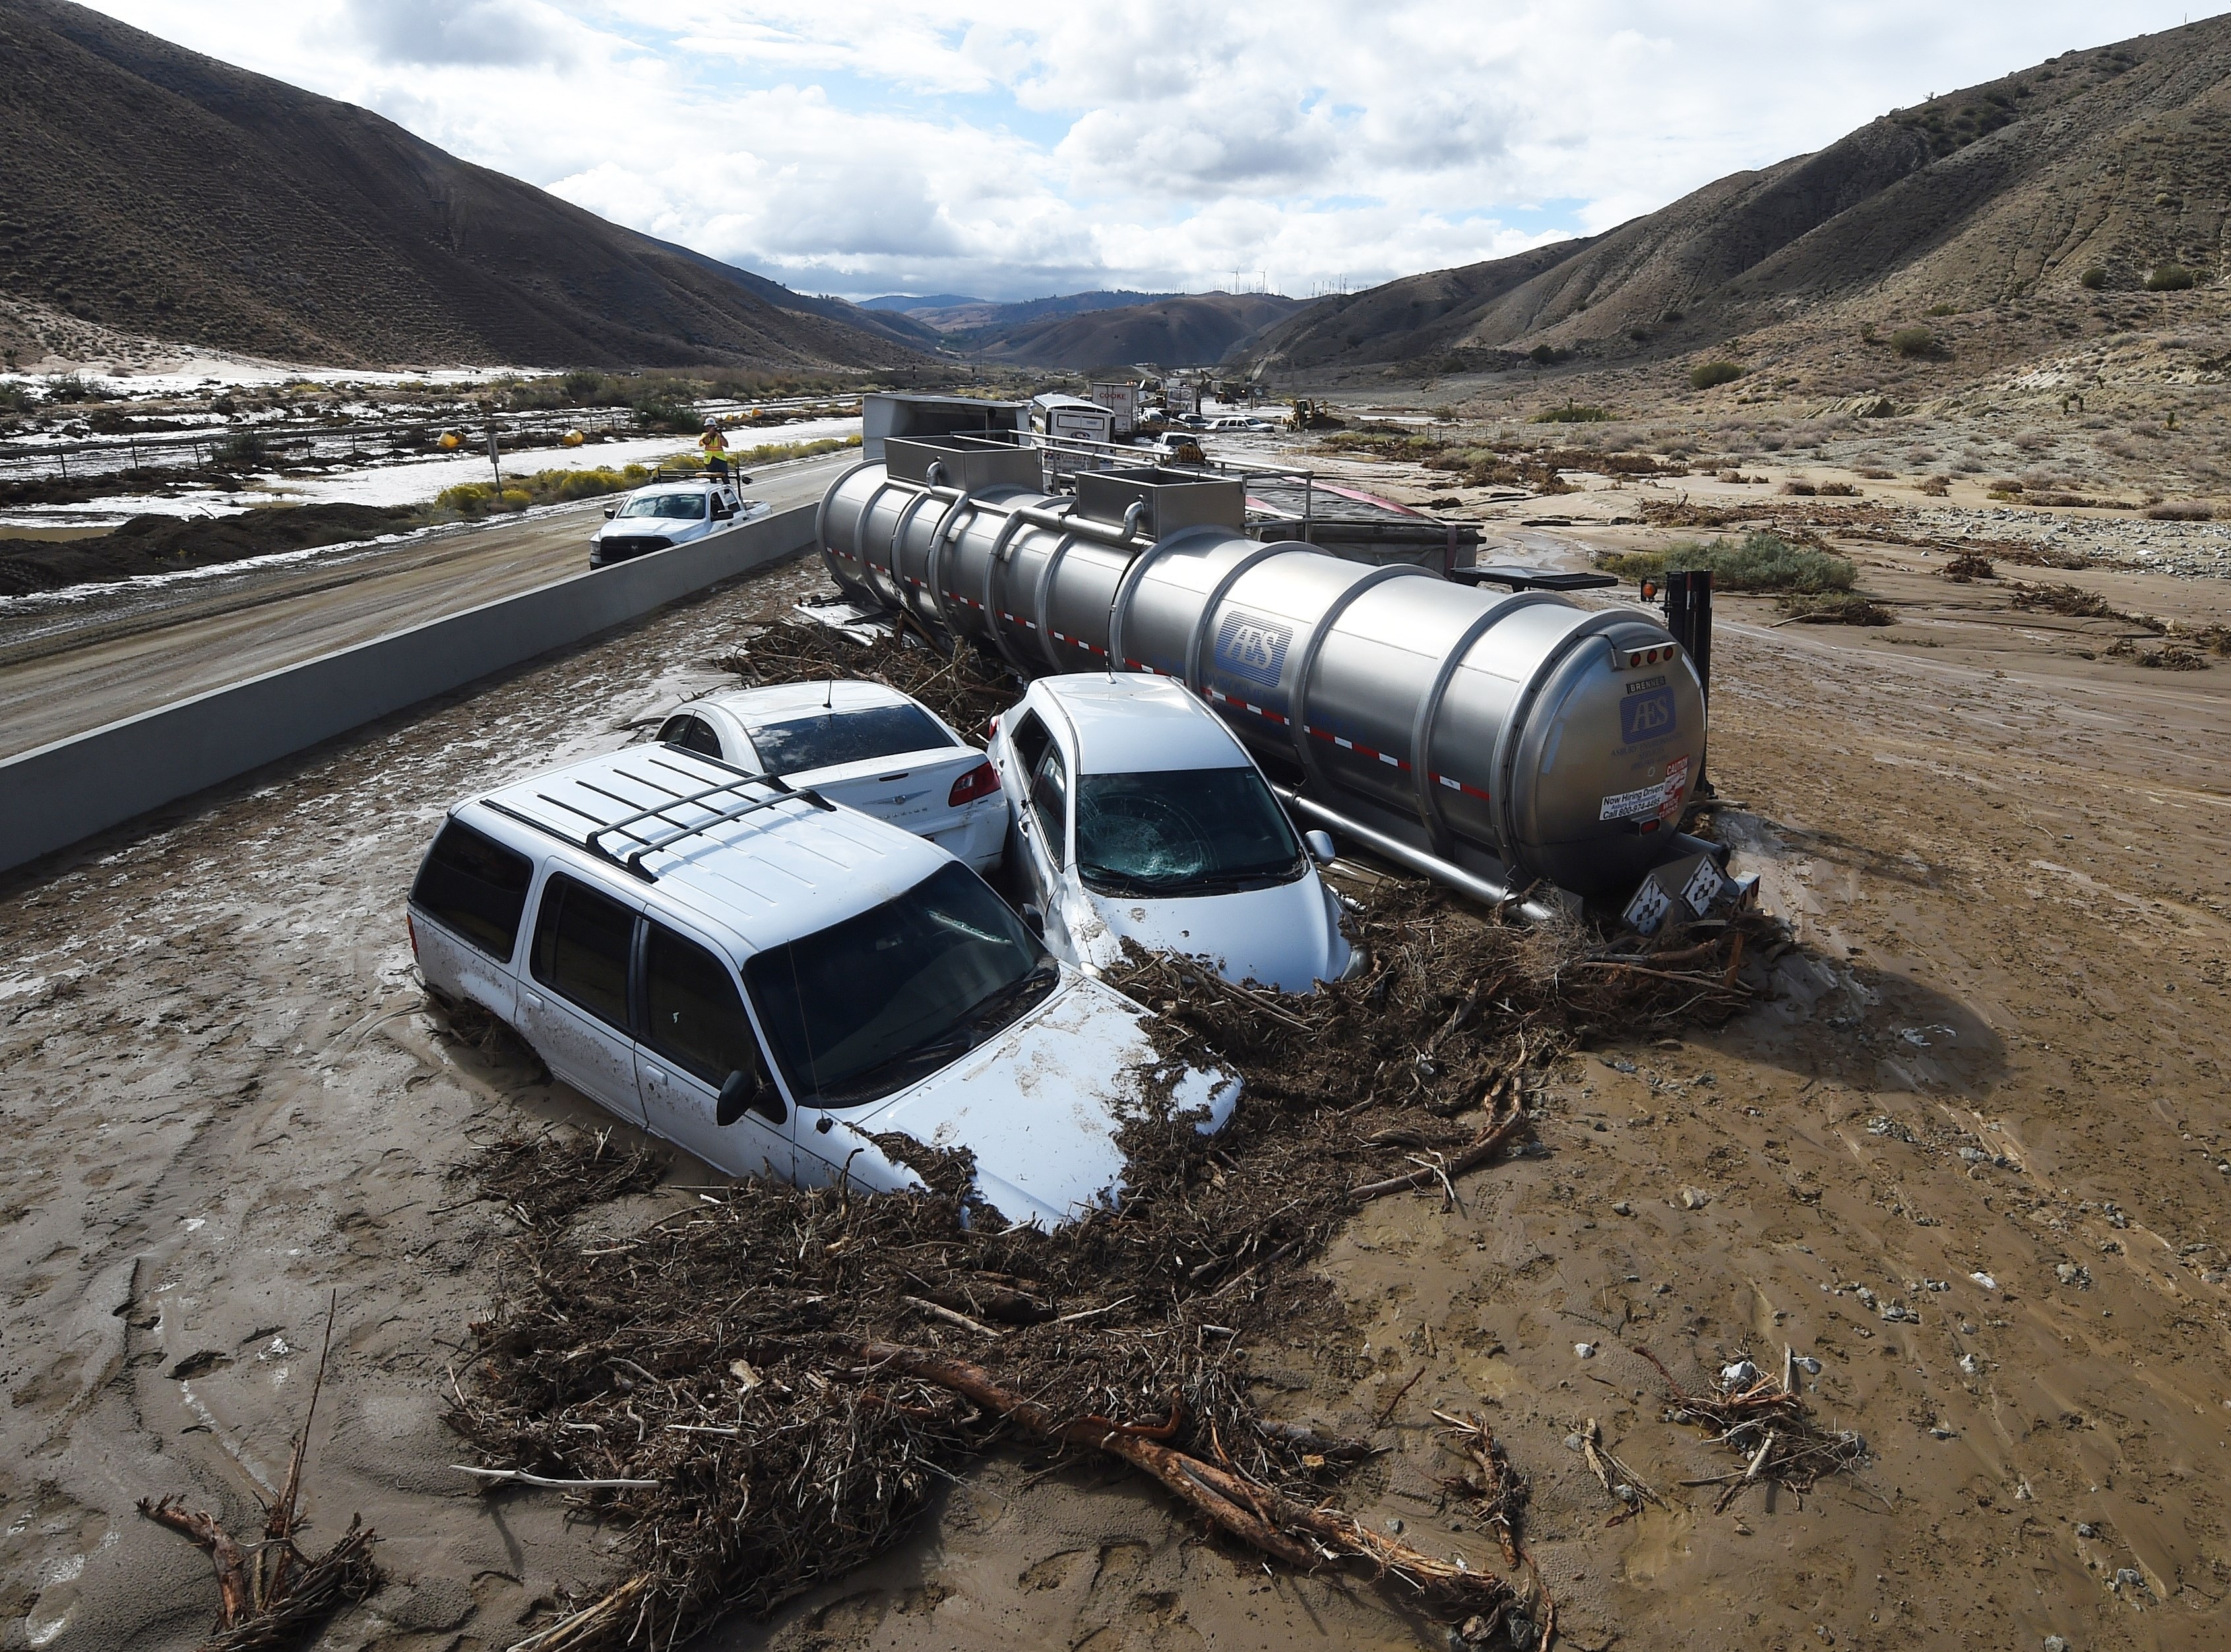 Vehicles are stuck on a road after being trapped by a mudslide on California Highway 58 in Mojave, Calif., on Friday. (Photo by Mark Ralston /AFP/Getty Images)